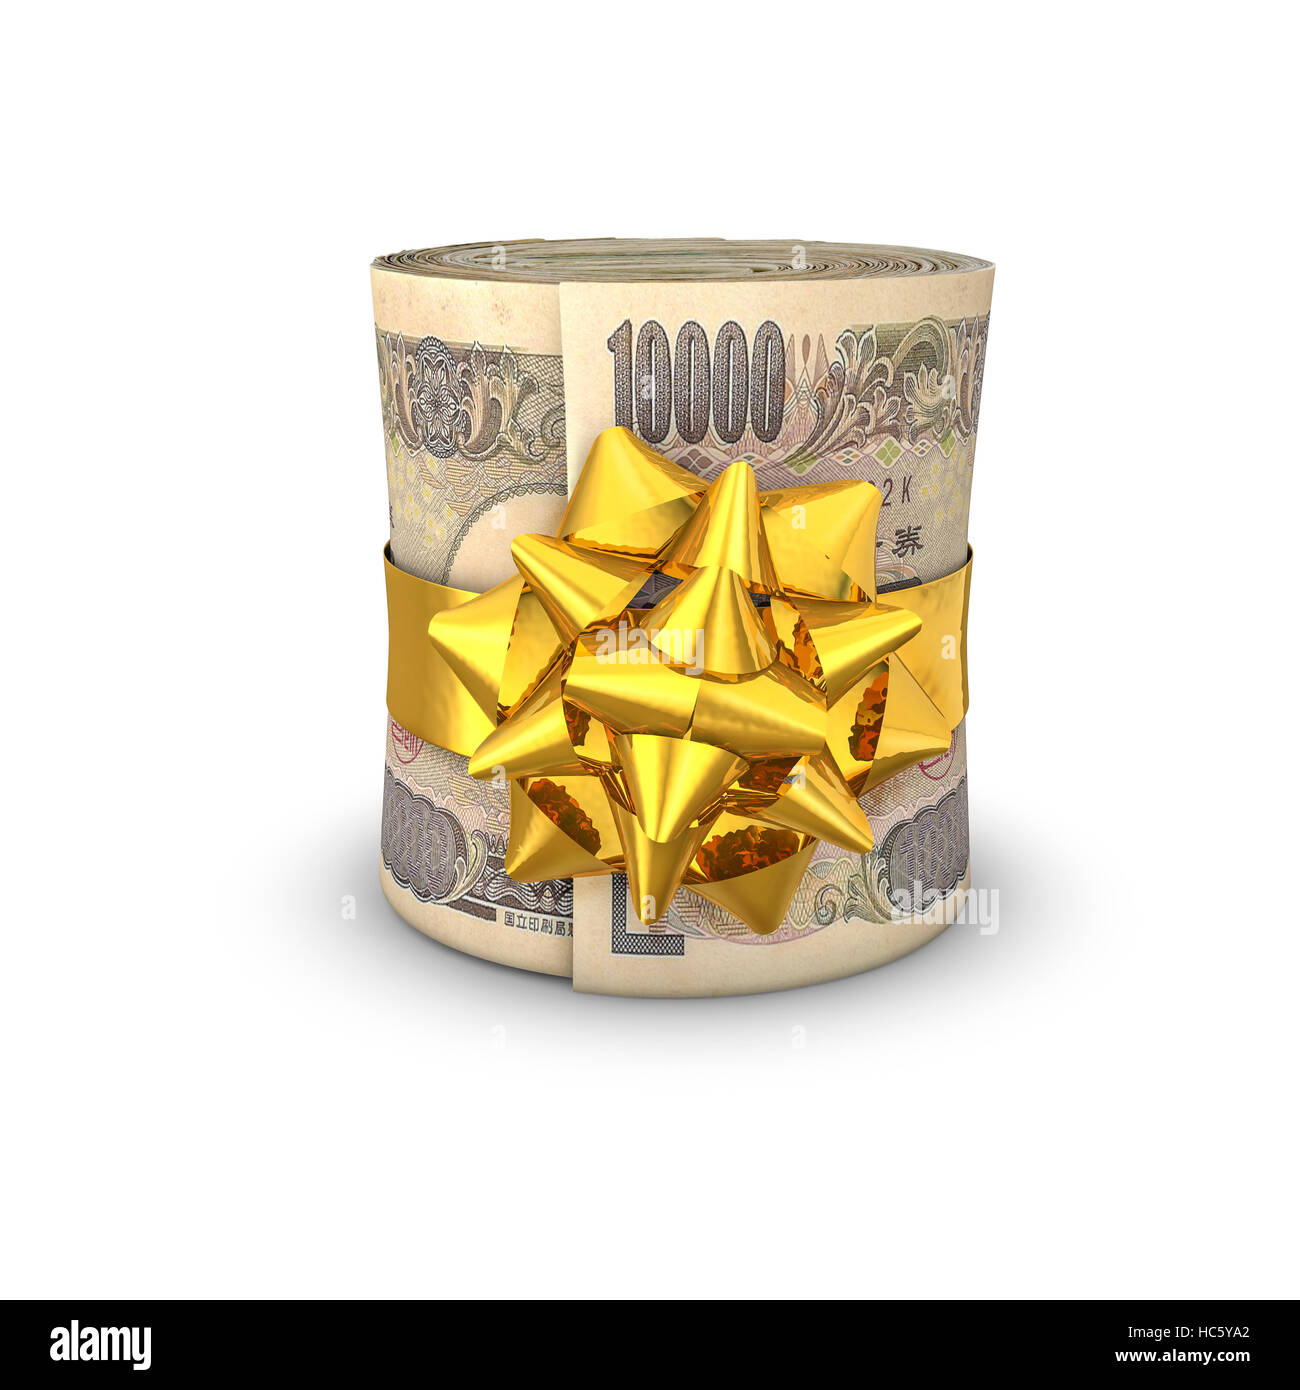 Money roll gift yen / 3D illustration of rolled up ten thousand yen notes tied with ribbon Stock Photo